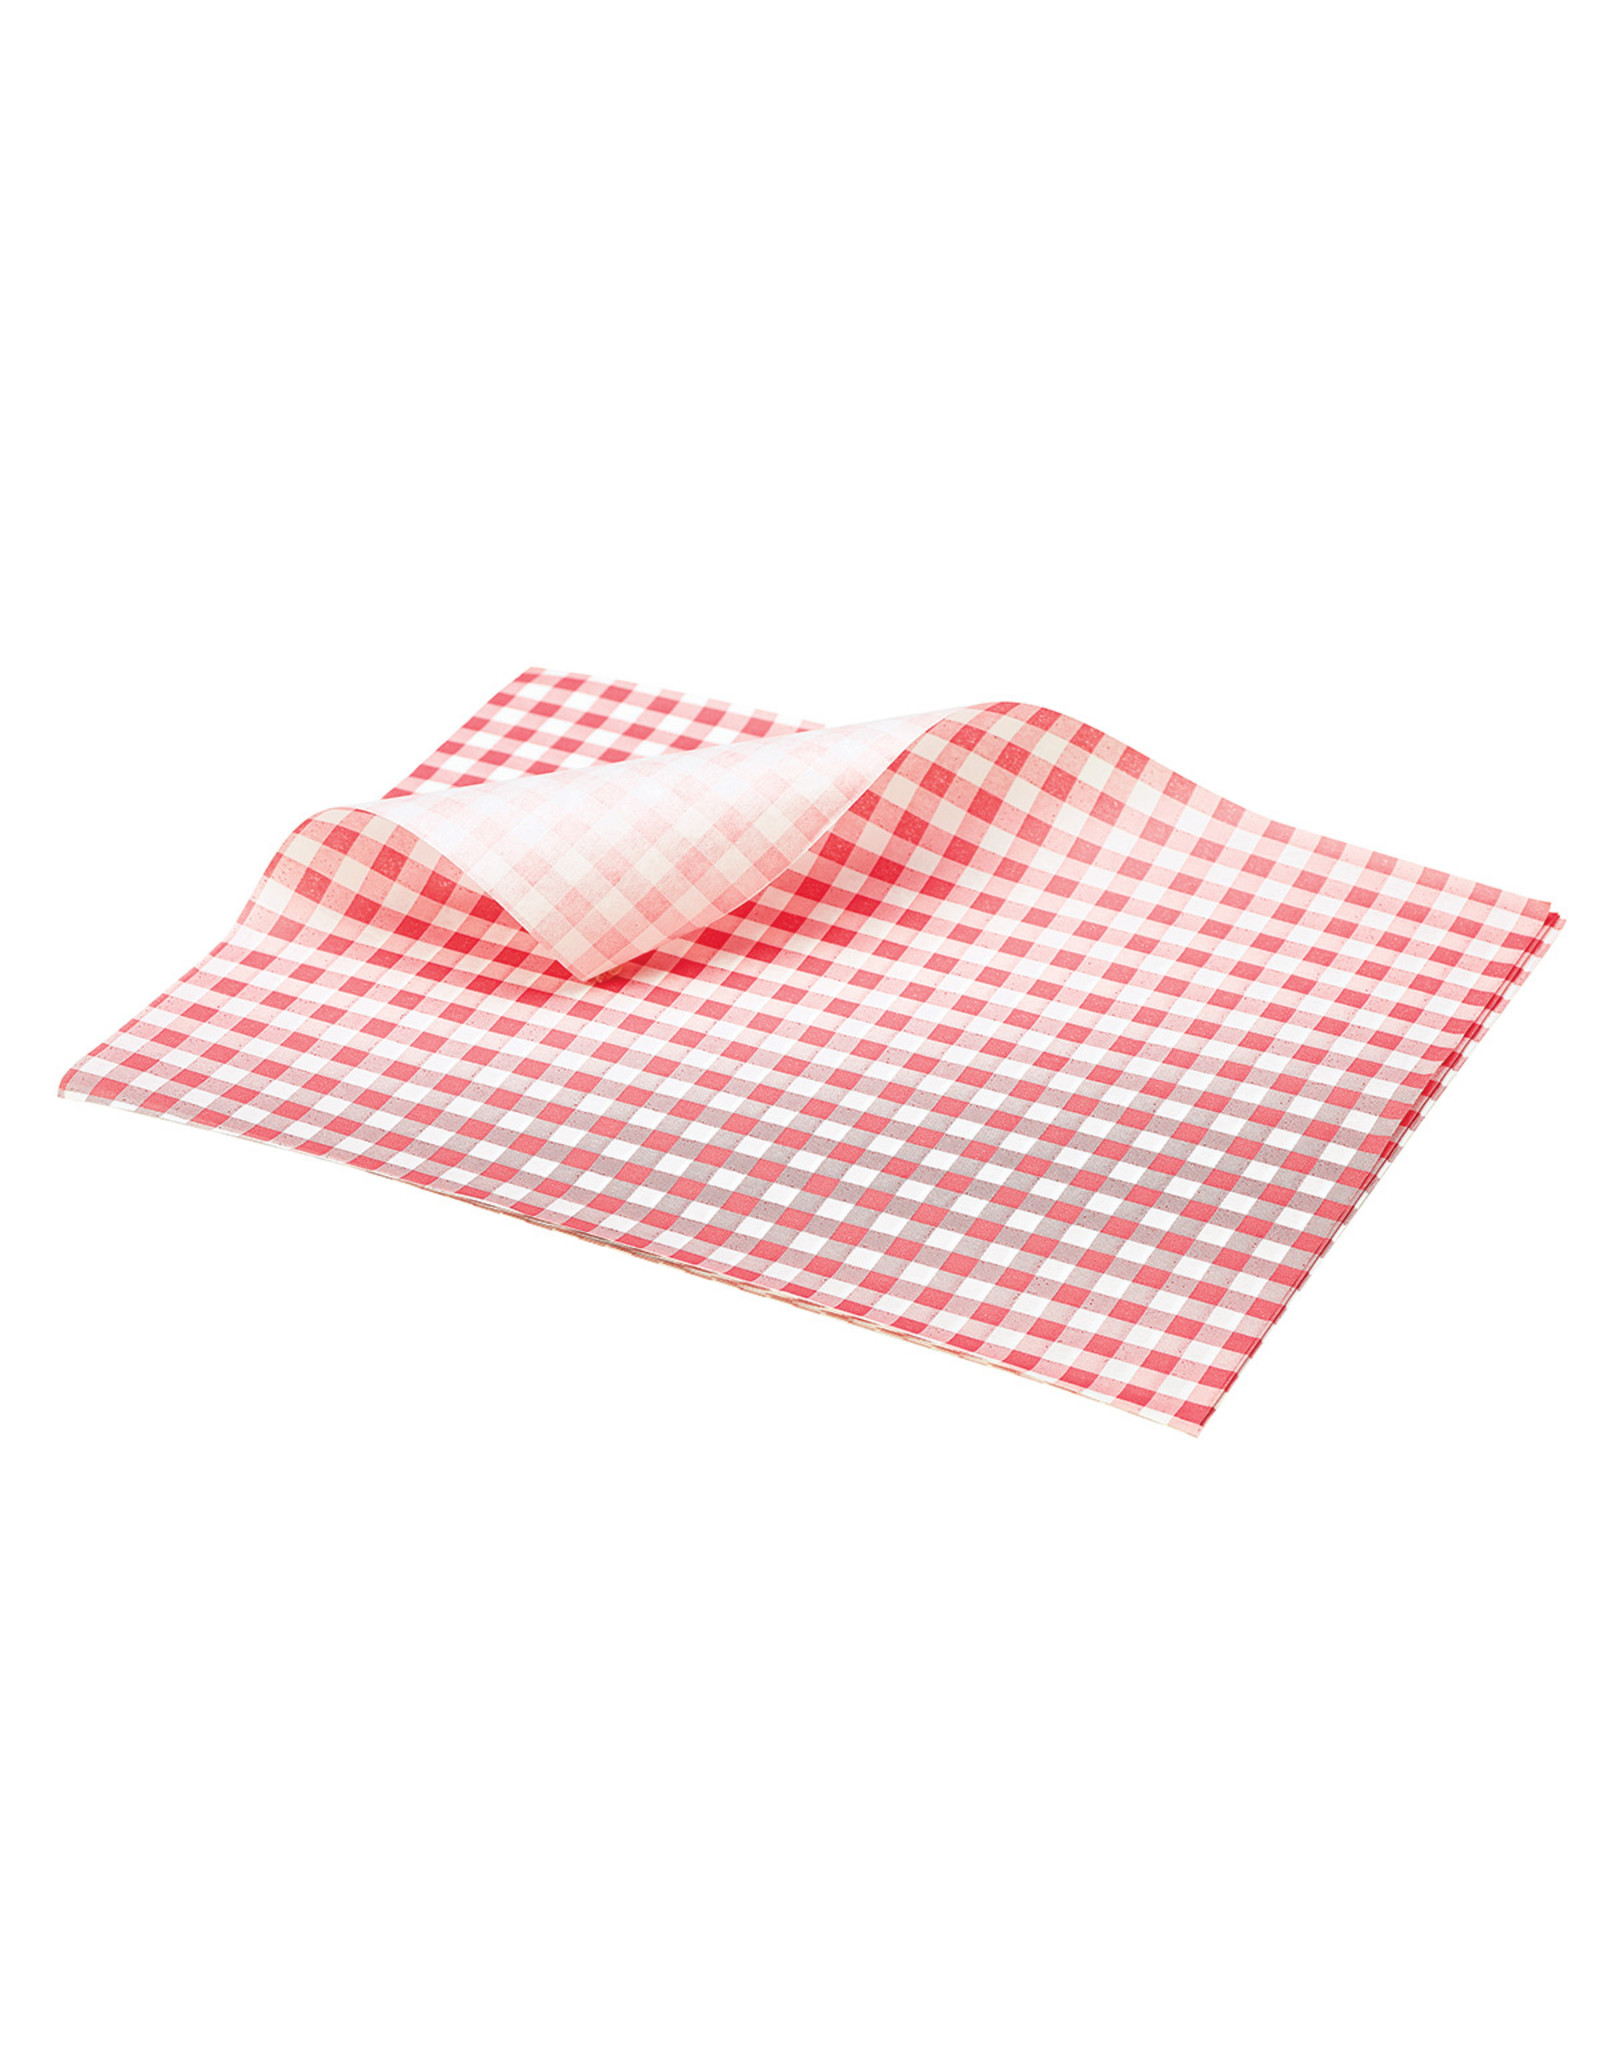 Stylepoint Greaseproof paper red gingham 25 x 20 cm 1000pcs